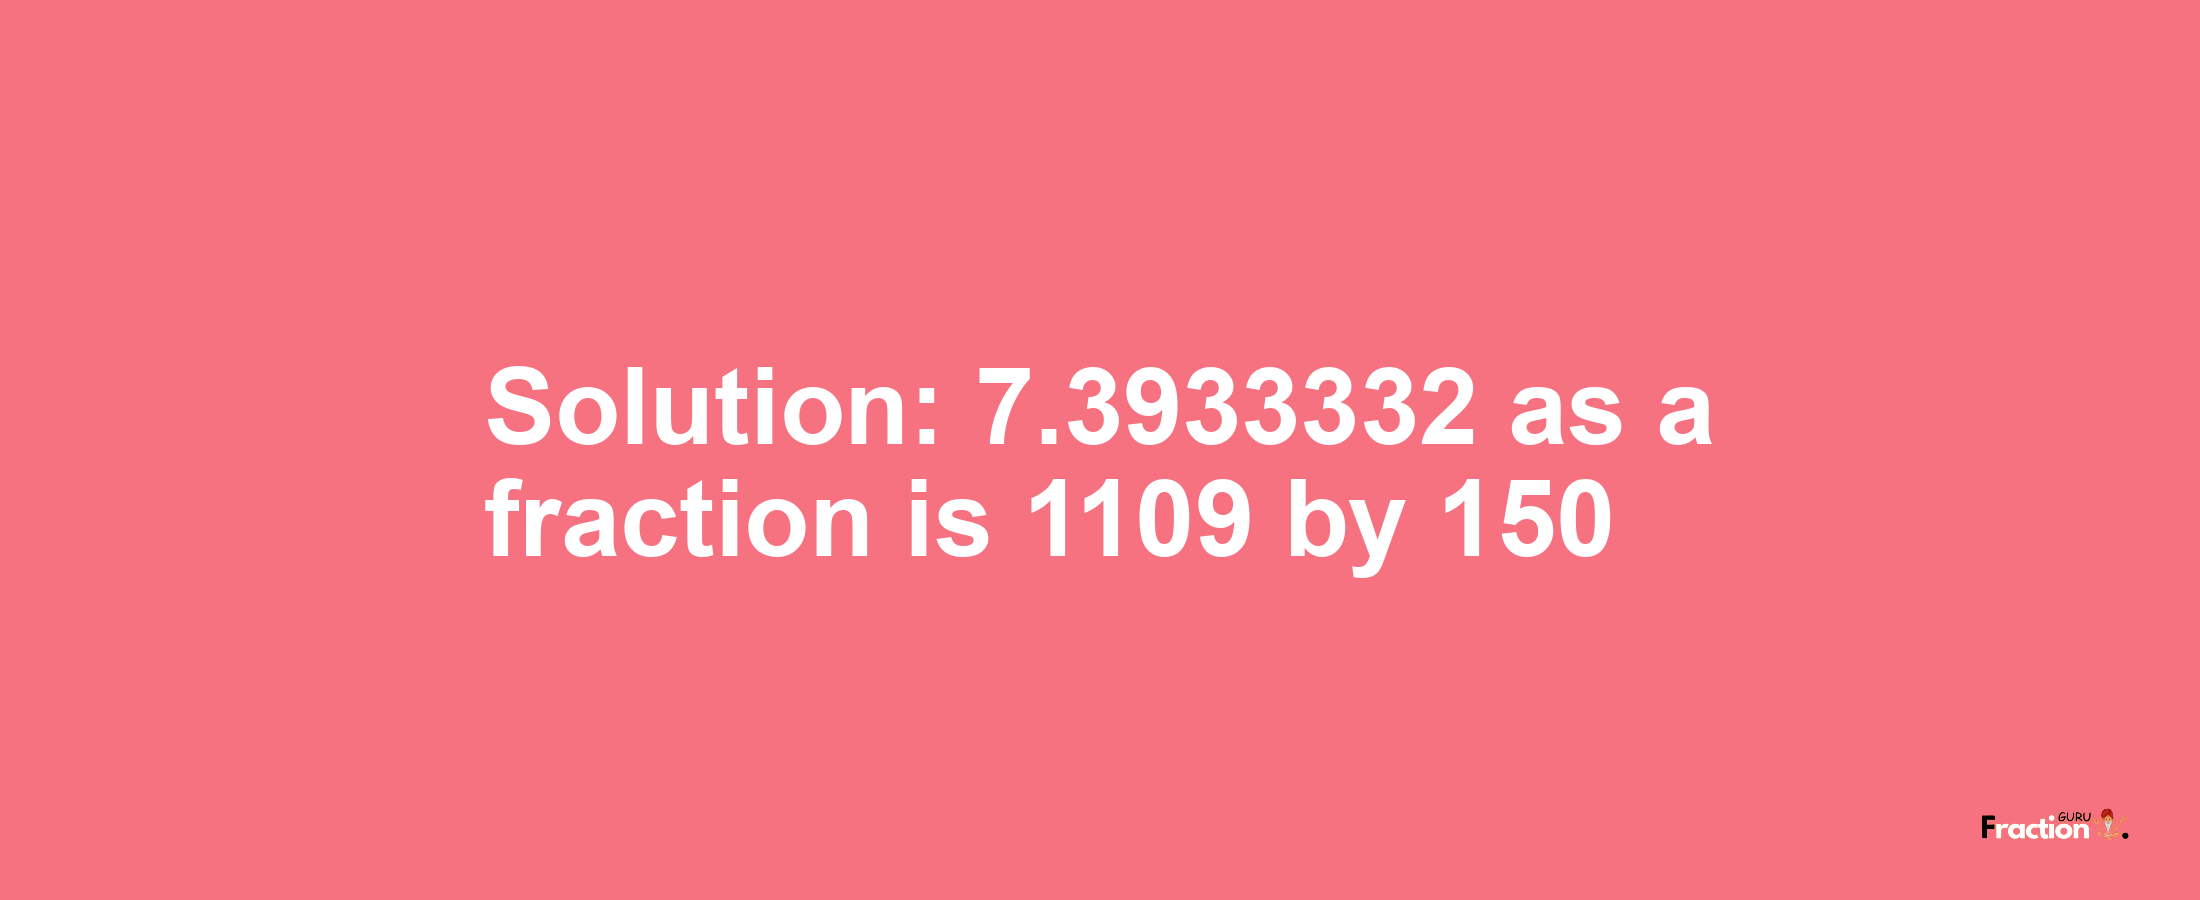 Solution:7.3933332 as a fraction is 1109/150